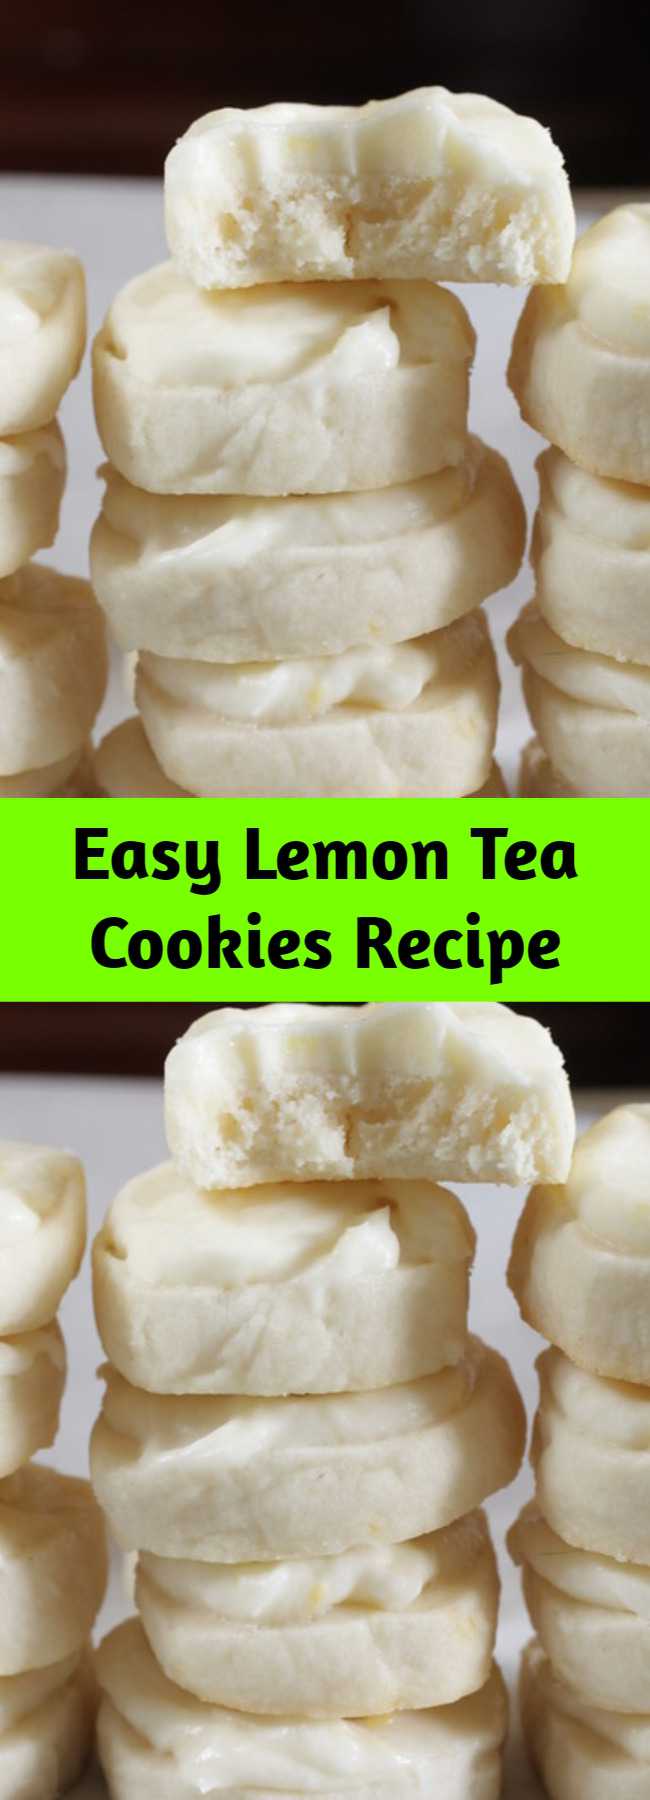 Easy Lemon Tea Cookies Recipe - My mom makes these at Christmas time and they are super addicting. Light but sweet and tangy. They’re a nice addition to a holiday cookie platter. Bite-sized and refreshing, they are the perfect little treat with a cup of hot tea. Even better yet, they are a slice-and-bake cookie, so there’s no rolling of dough, and you can bake them off as you like. For an alternative to frosting, simply toss baked cookies in confectioners’ sugar.